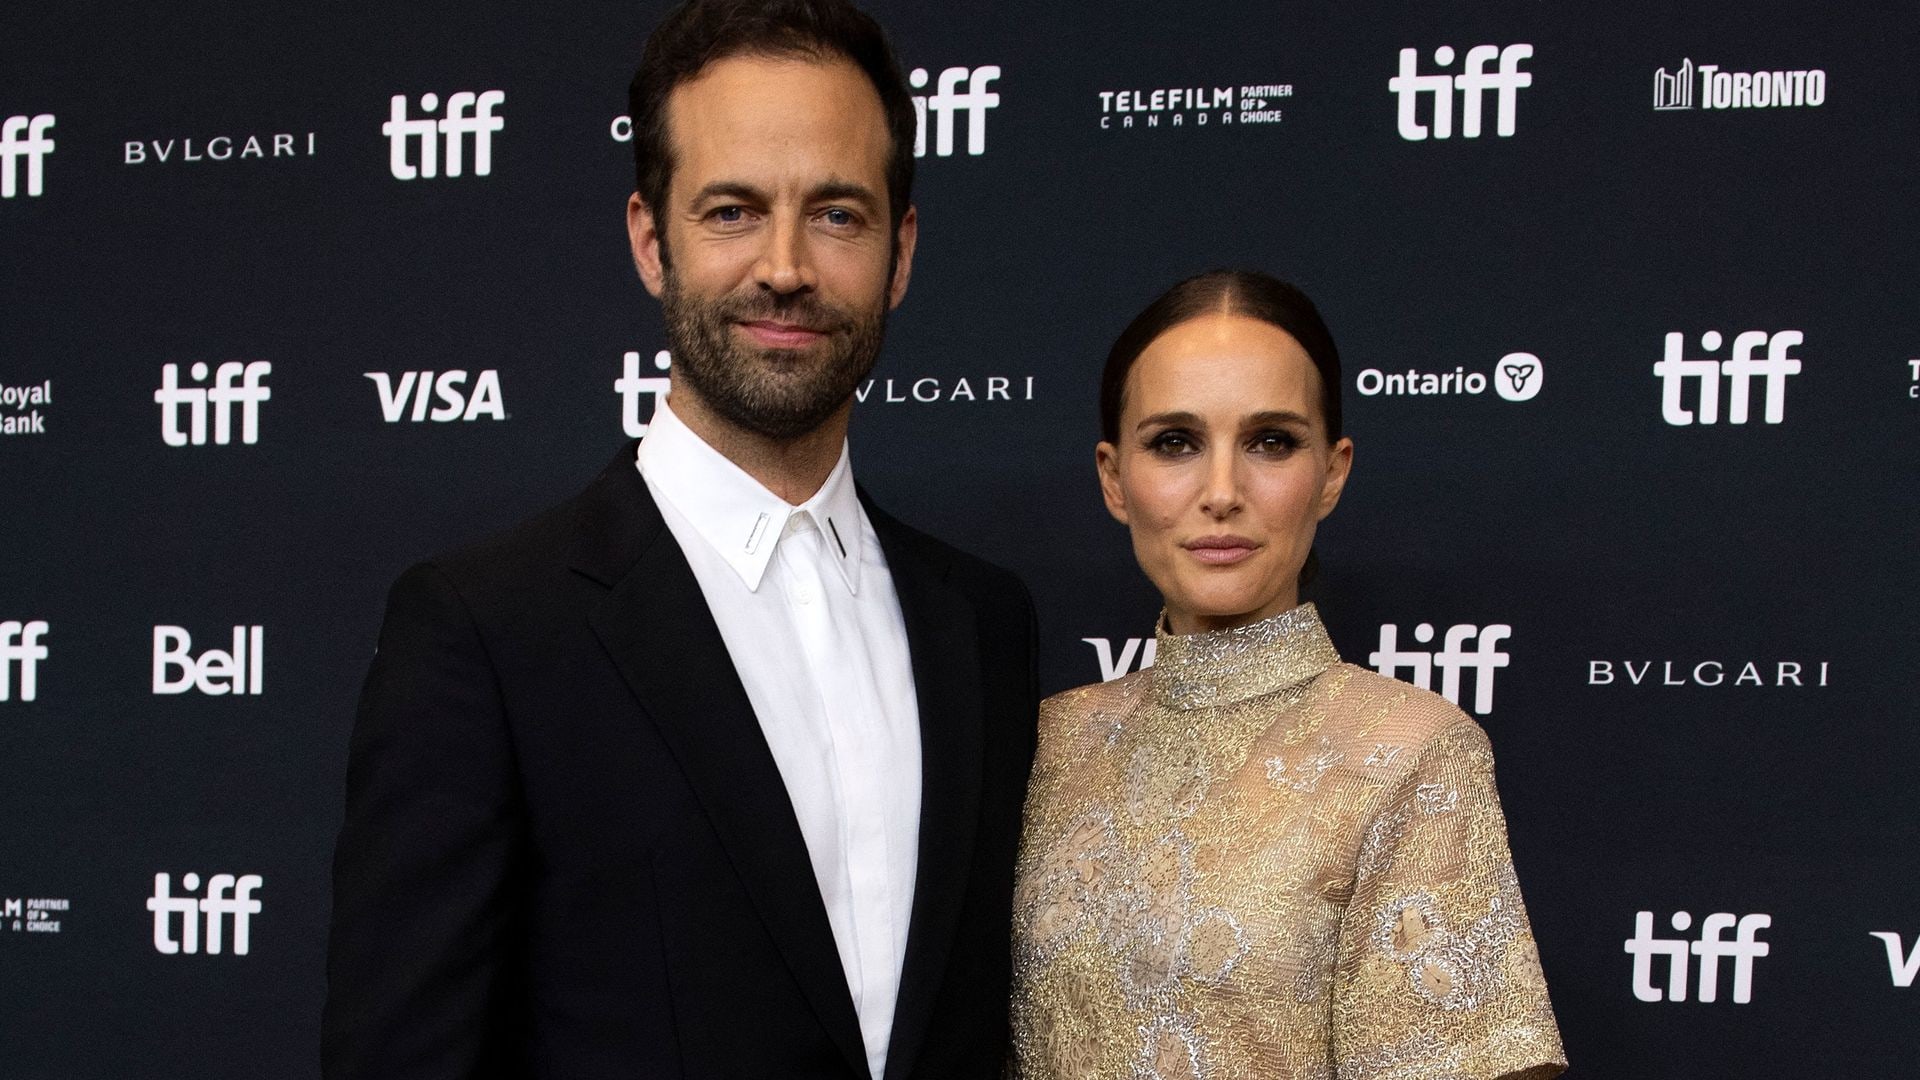 Director Benjamin Millepied (L) and actress Natalie Portman attend the red carpet for the premiere of Carmen during the 2022 Toronto International Film Festival at at Tiff Bell Lightbox on September 11, 2022 in Toronto, Canada. (Photo by VALERIE MACON / AFP) (Photo by VALERIE MACON/AFP via Getty Images)